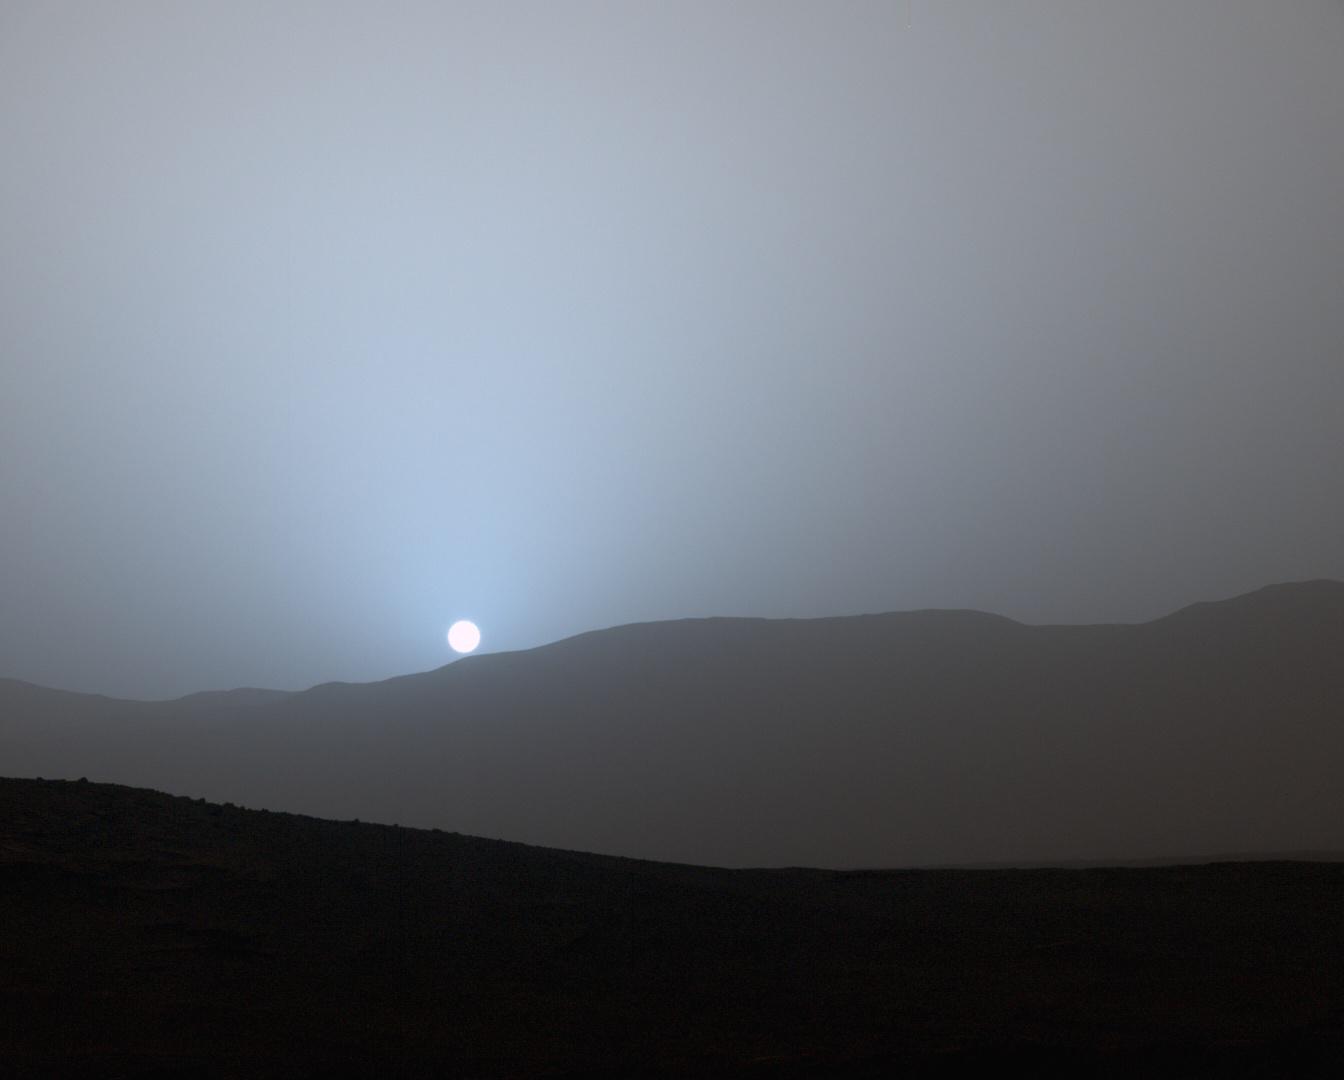 NASA's Curiosity Mars rover recorded this view of the sun setting at the close of the mission's 956th Martian day, or sol (April 15, 2015), from the rover's location in Gale Crater. Credit: NASA/JPL-Caltech/MSSS/Texas A&M Univ.